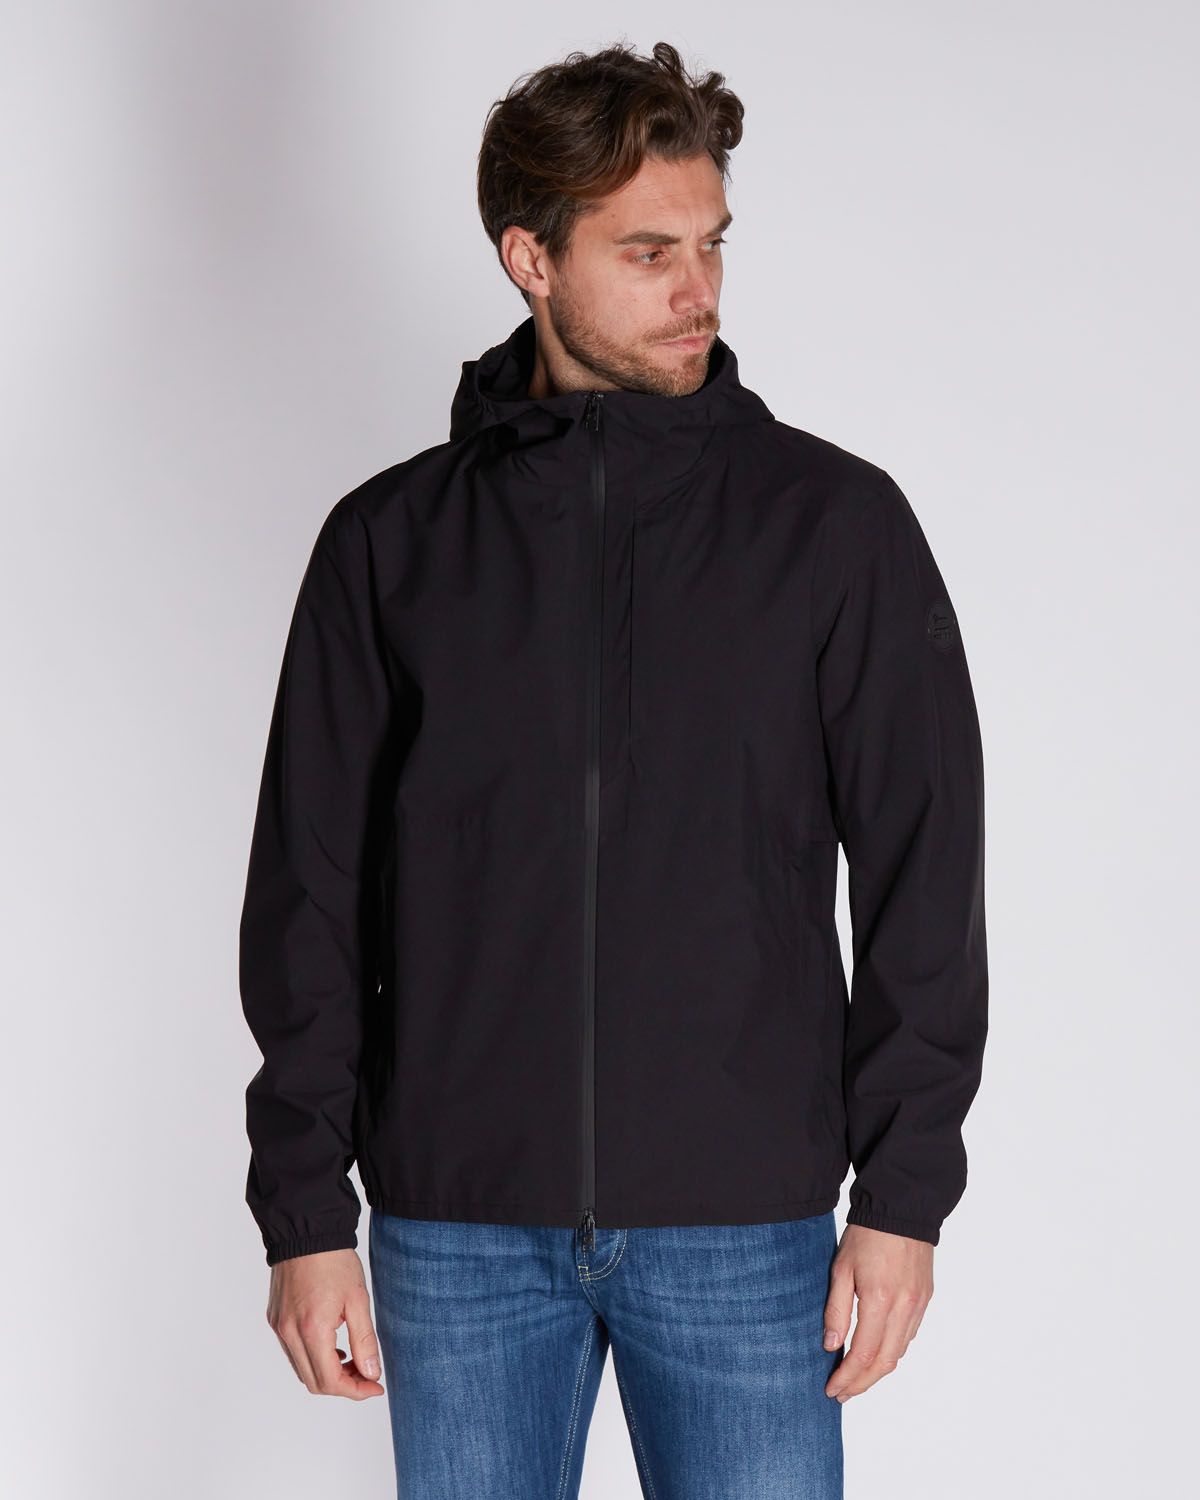 PACIFIC TWO LAYERS JACKET NERA